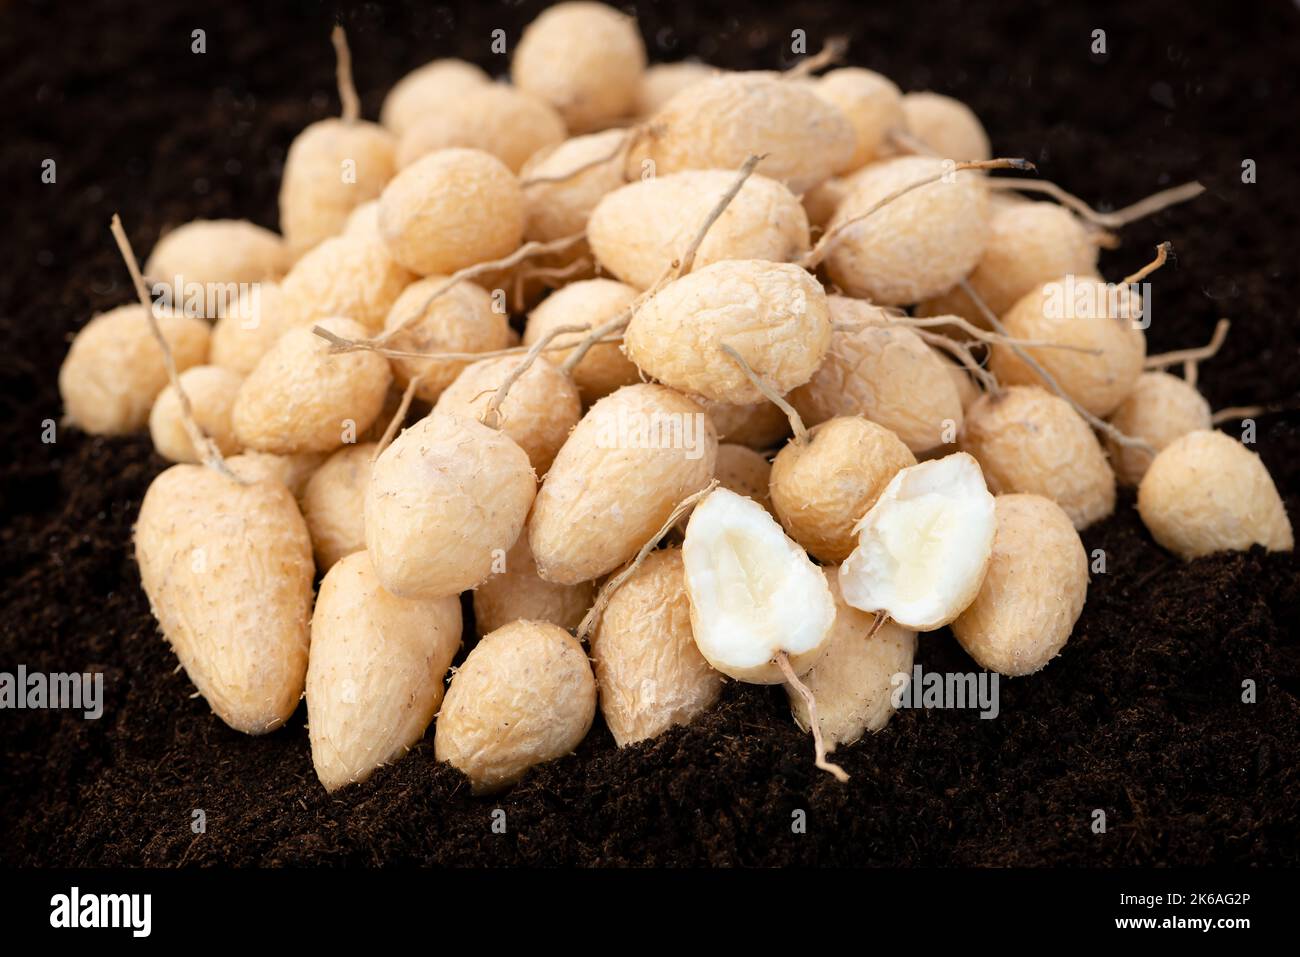 Arrowroot Topi tambo leren marantaceae calathea allouia roots washed cleaned raw uncooked on top rich soil Caribbean crop in Trinidad and Tobago grow Stock Photo